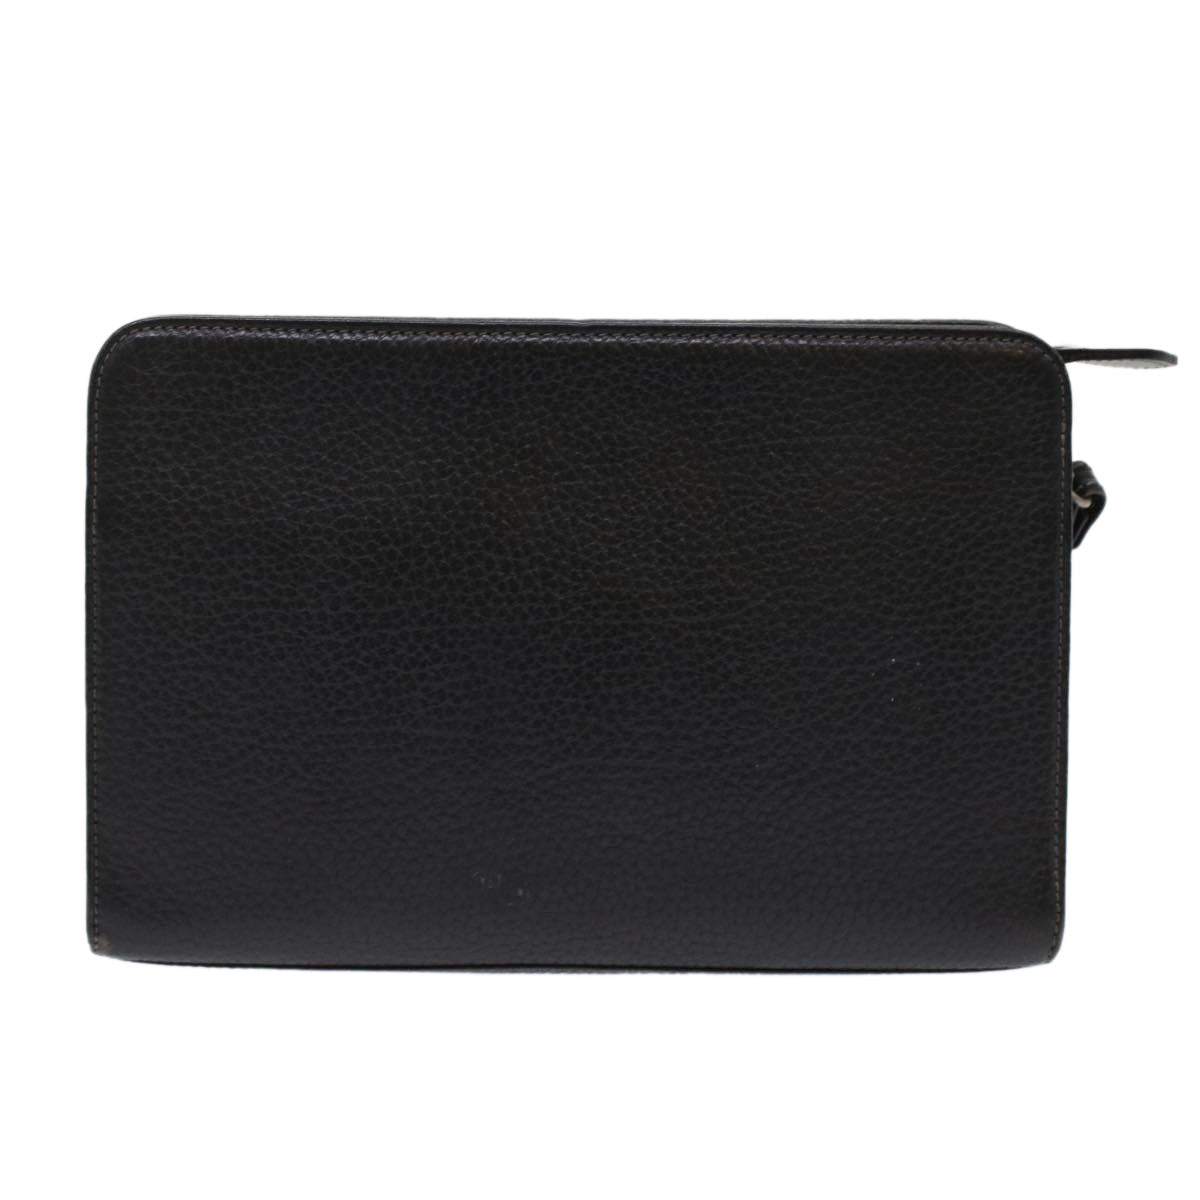 Burberrys Clutch Bag Leather Black Auth bs7004 - 0